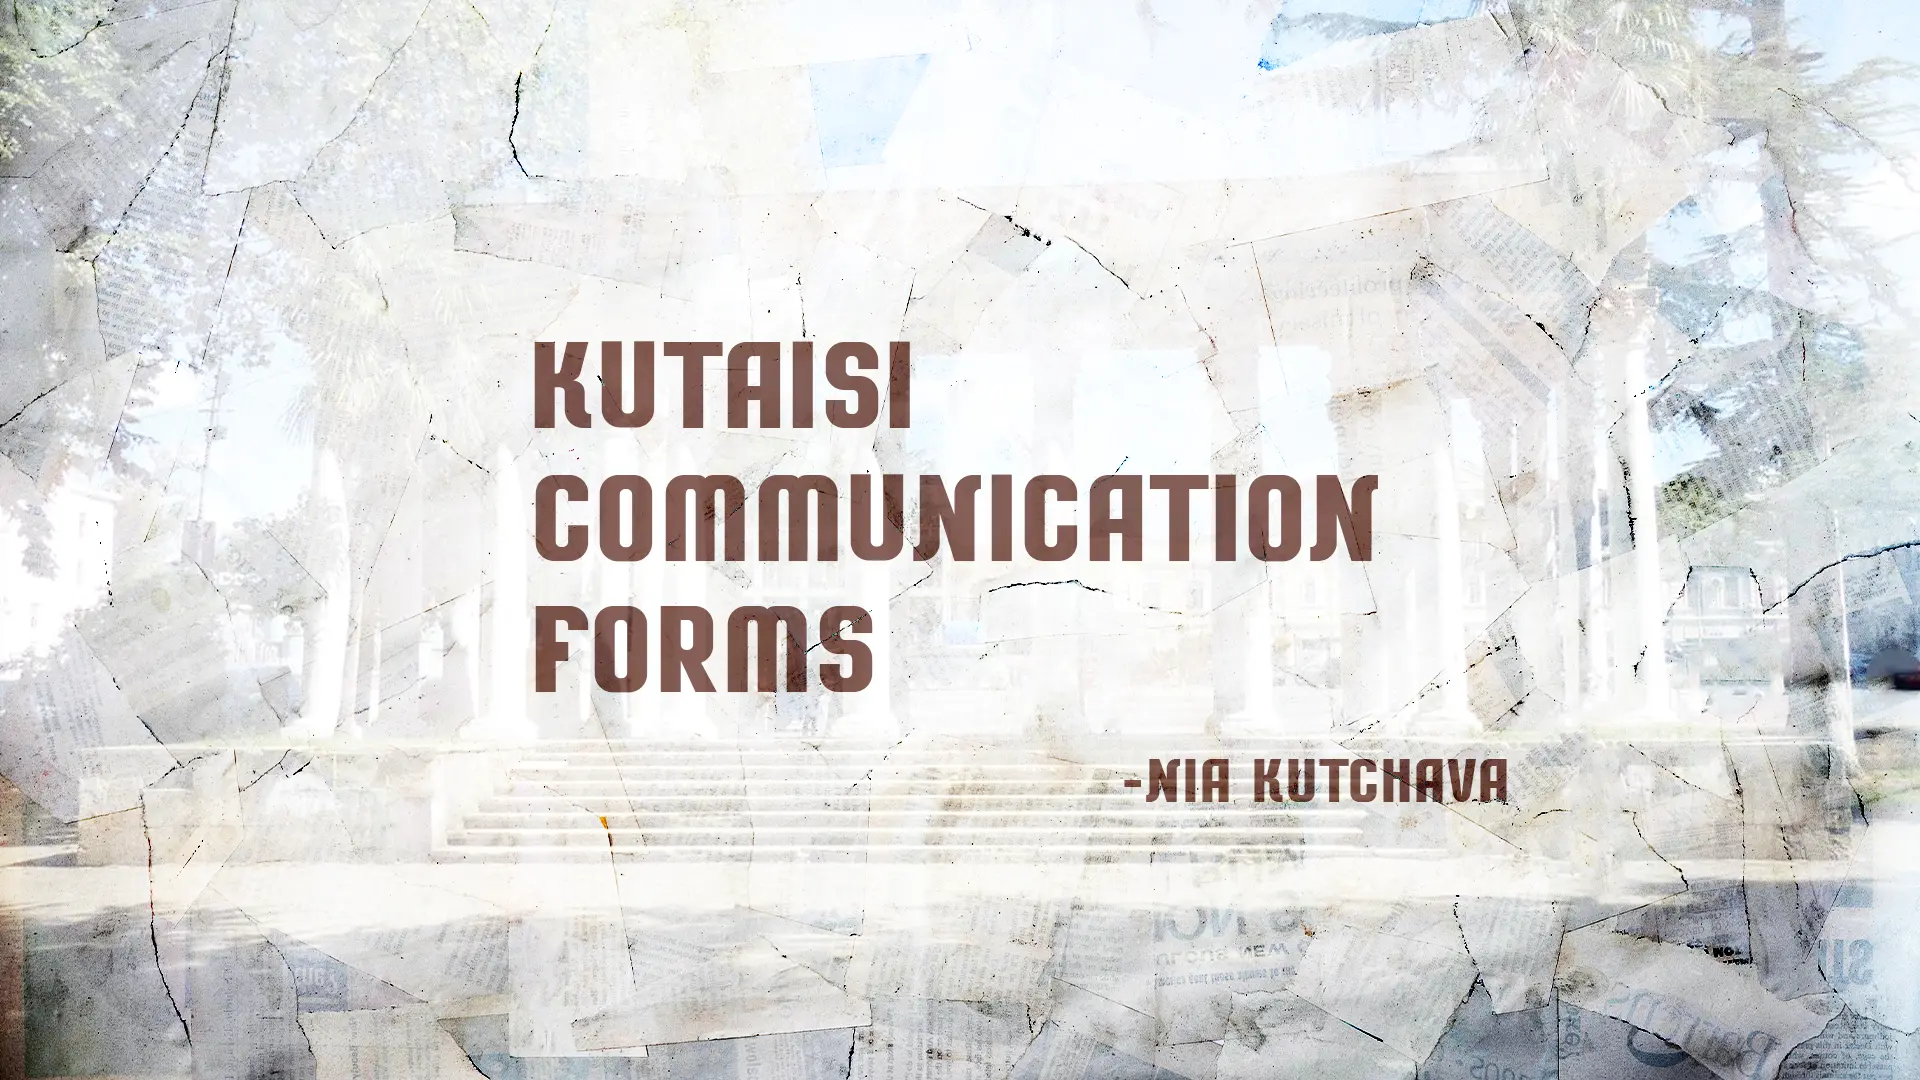 Kutaisi Communication Forms – A Brief Sociolinguistic Analysis